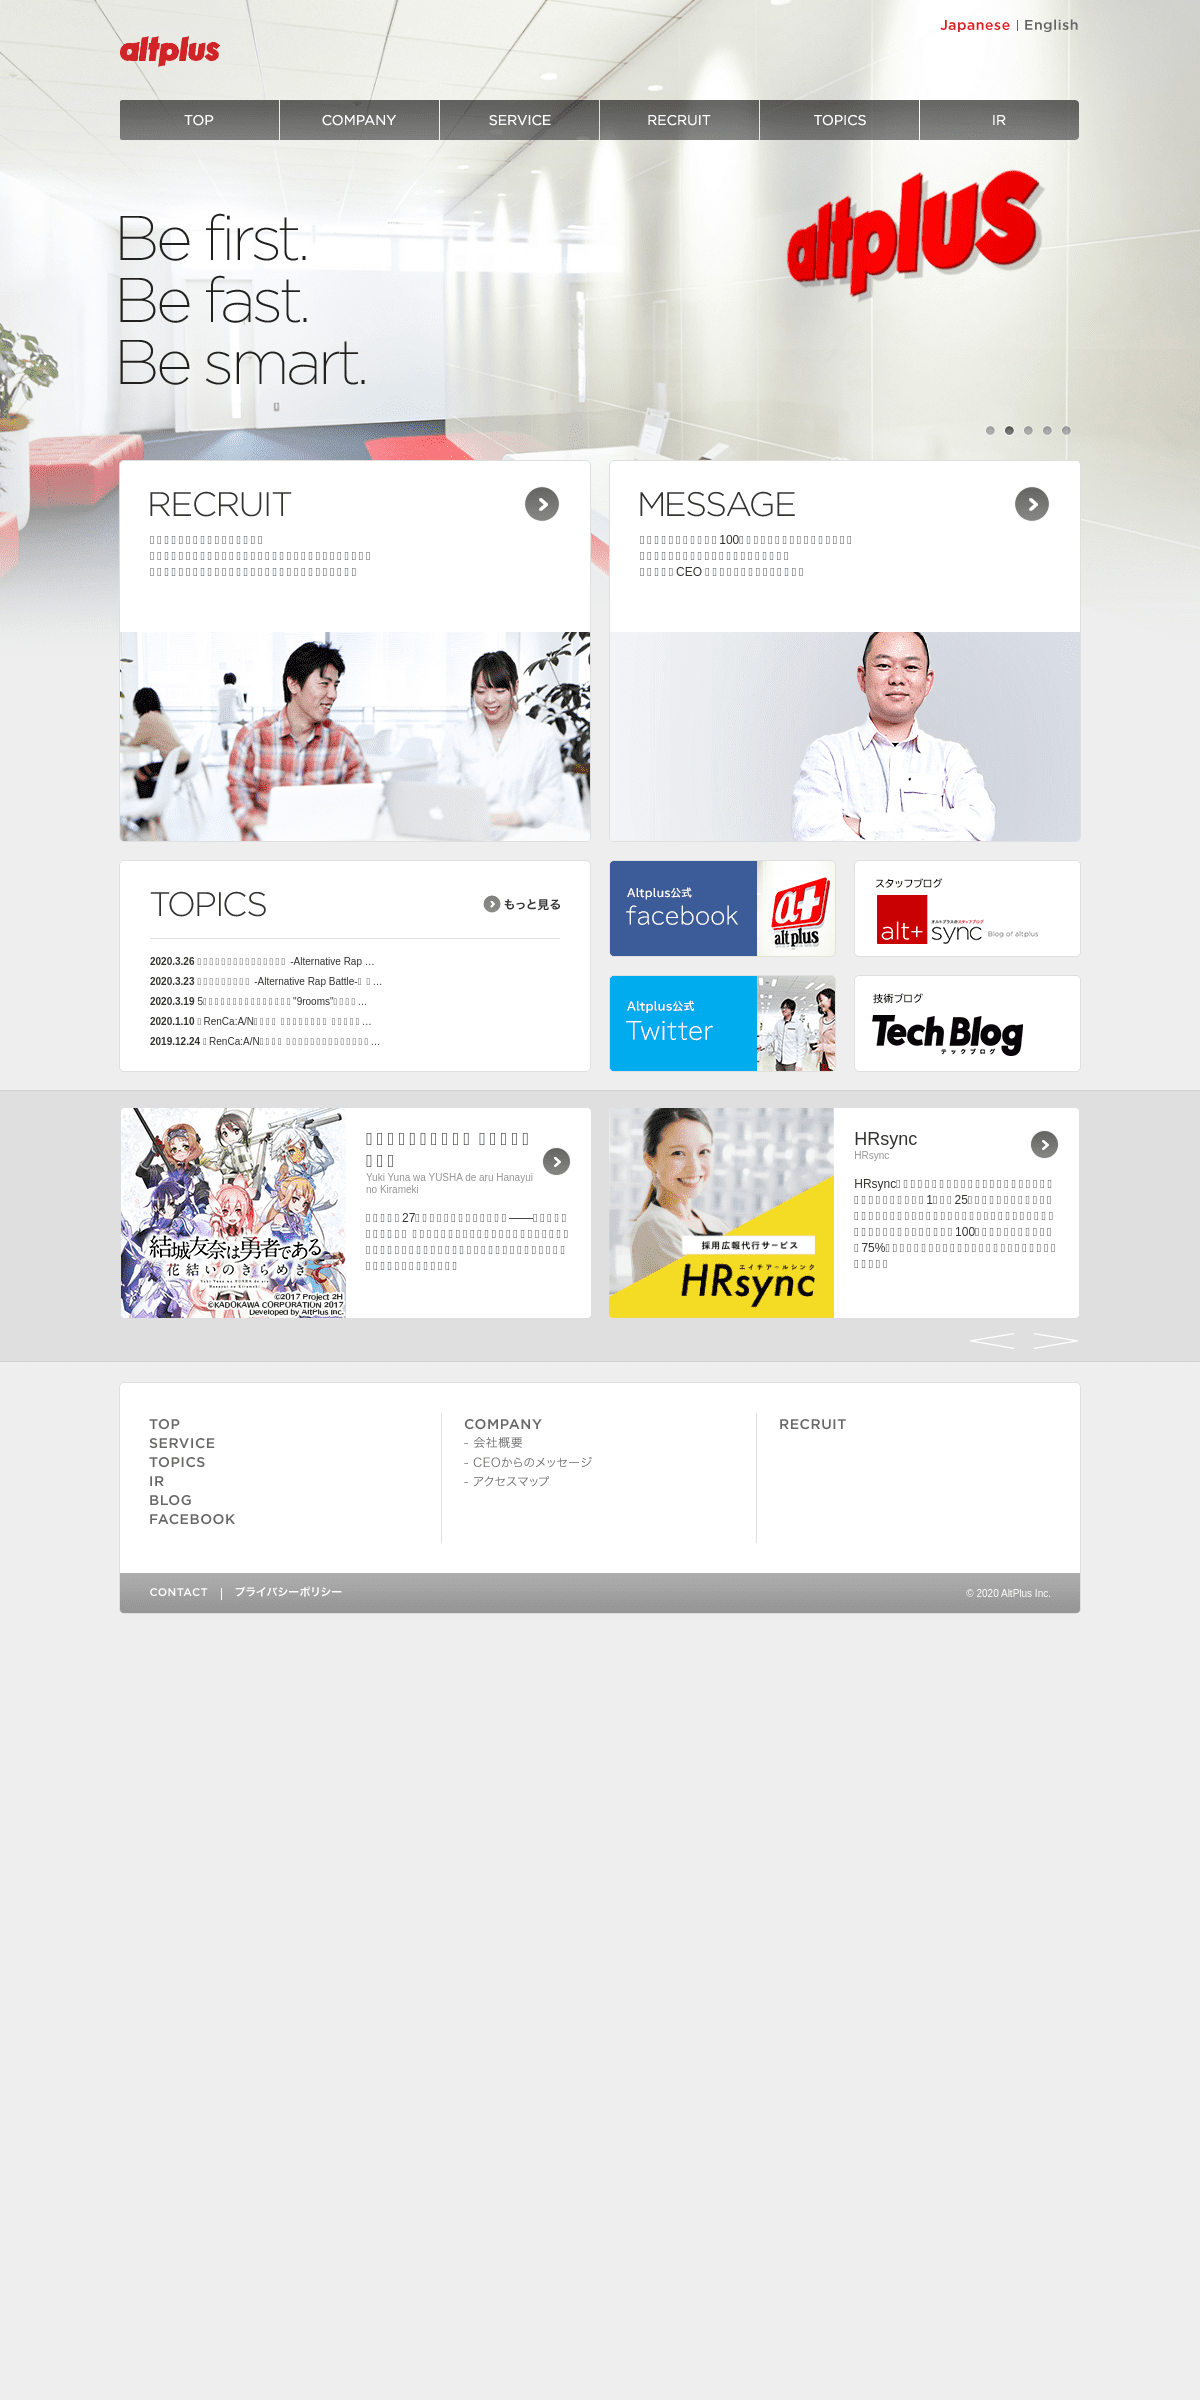 A complete backup of altplus.co.jp